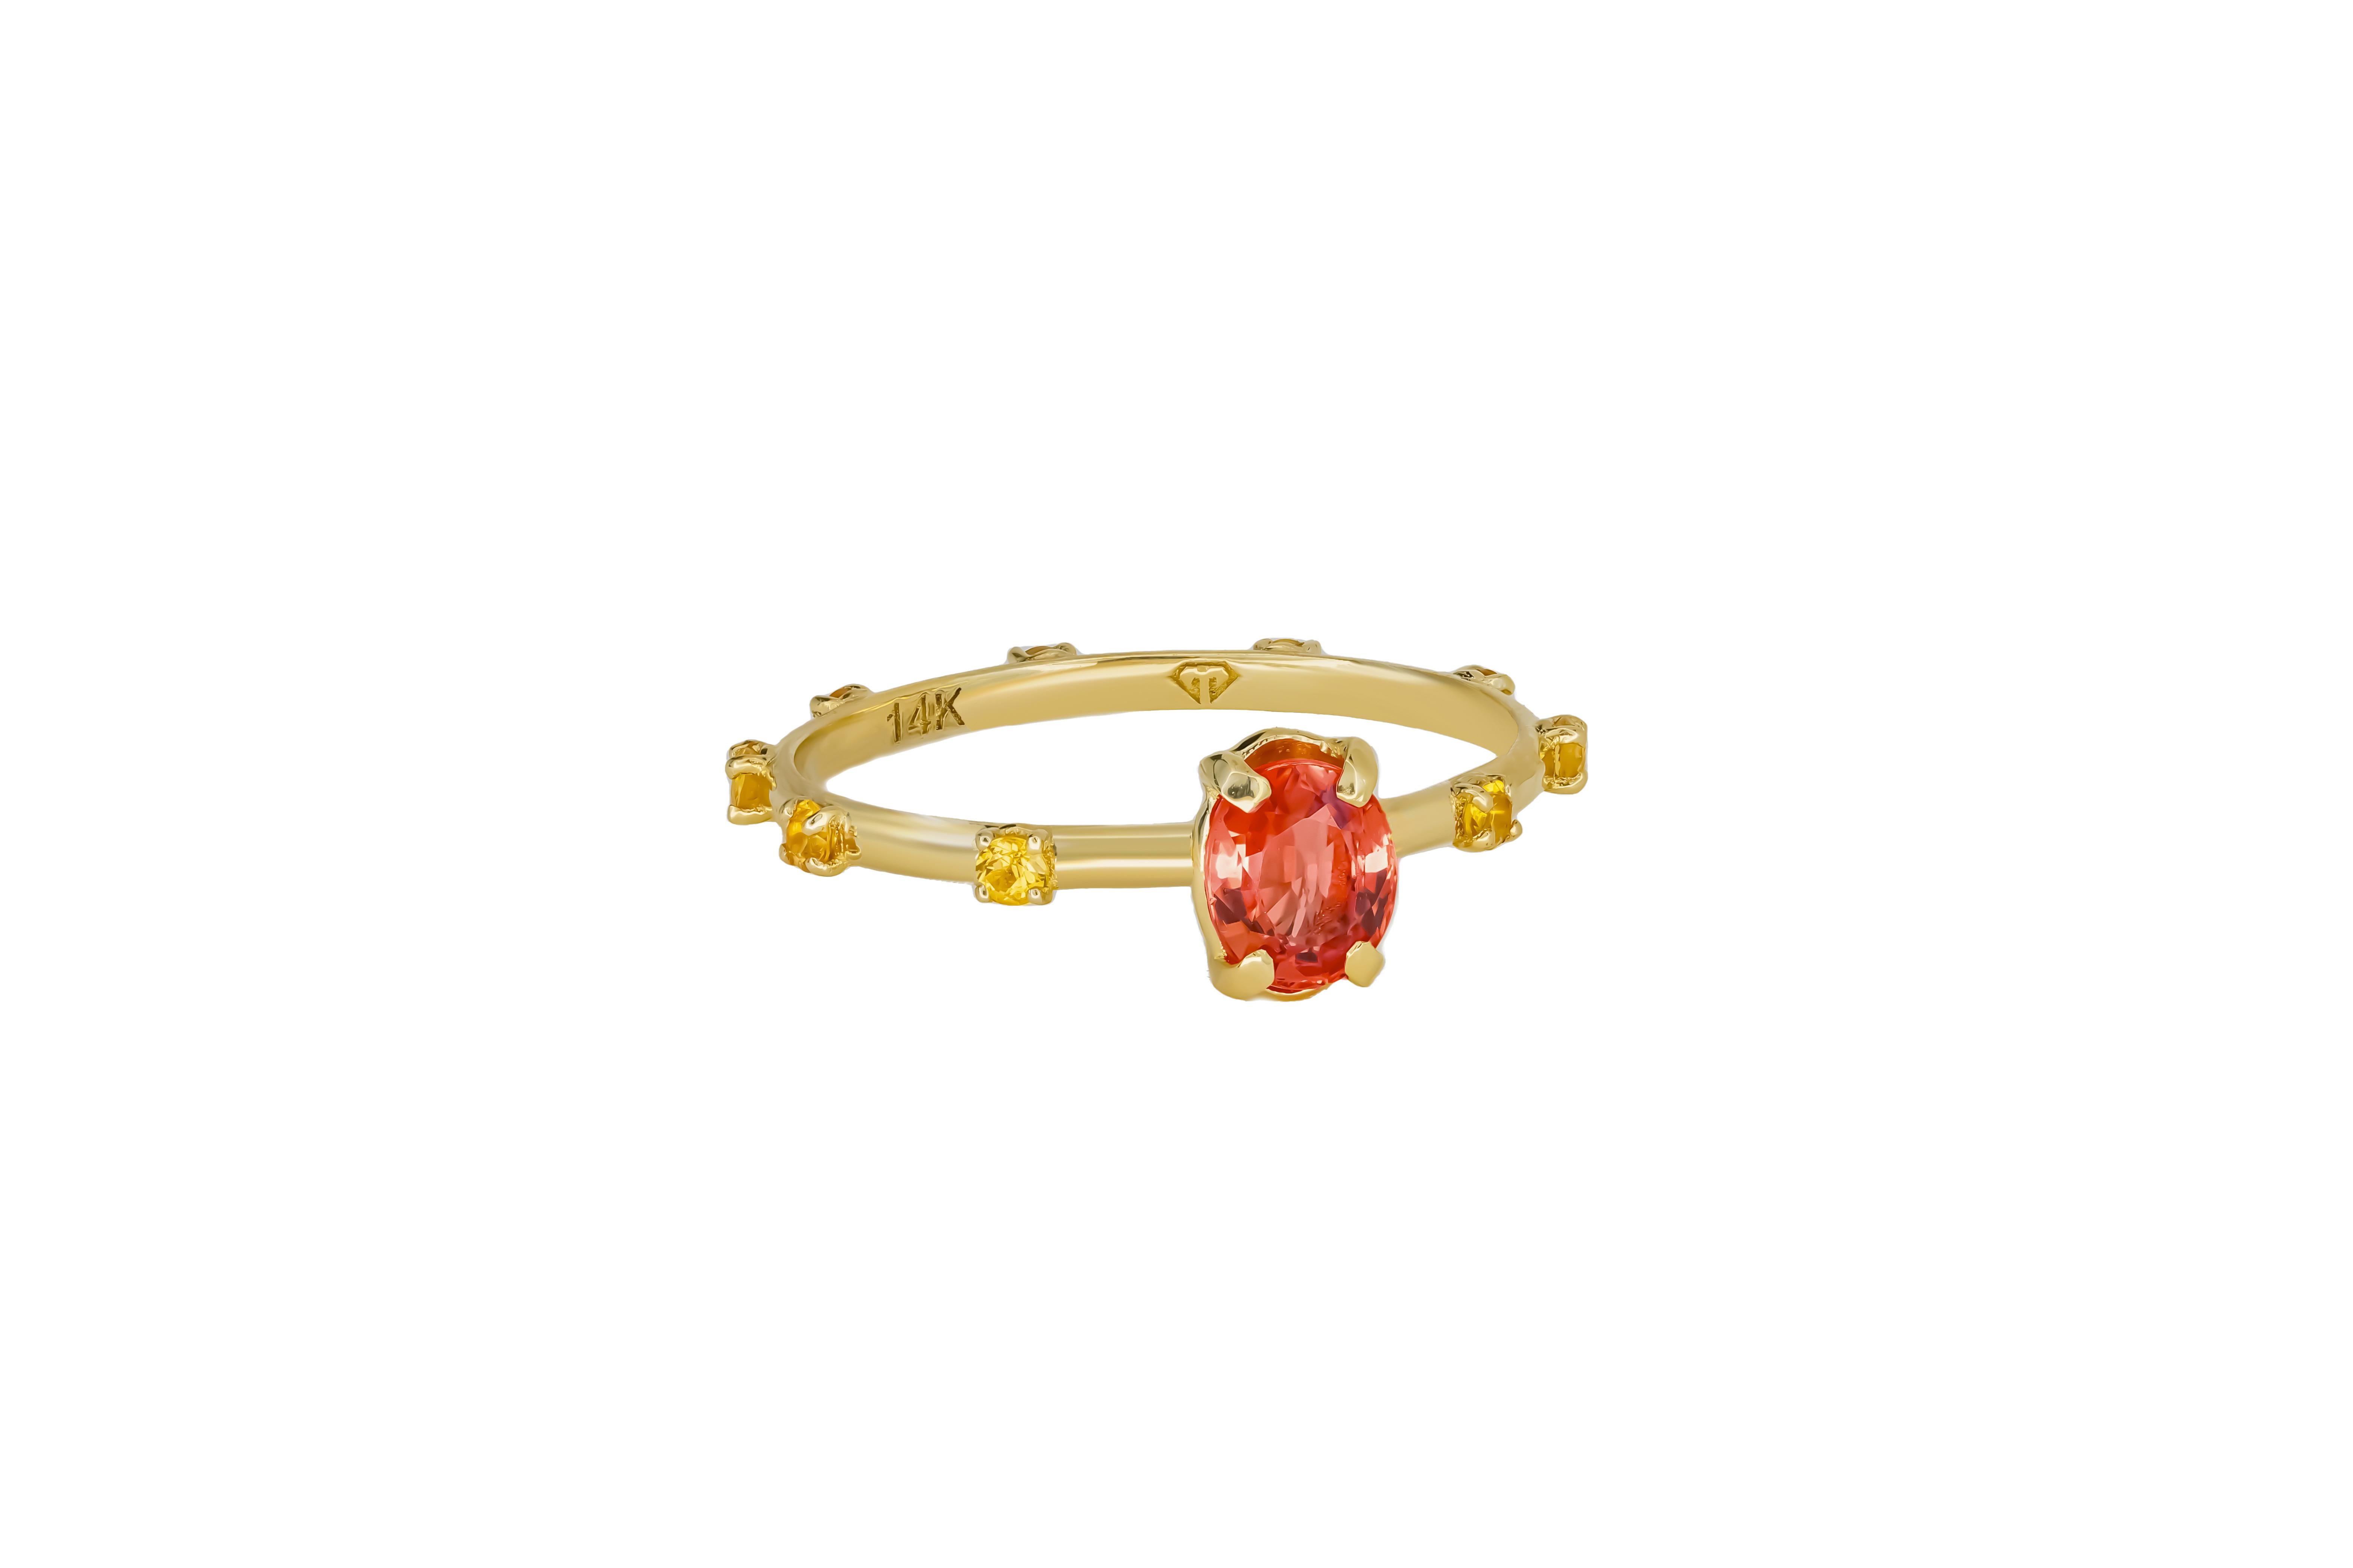 For Sale:  Peach color gemstone 14k gold ring. 2